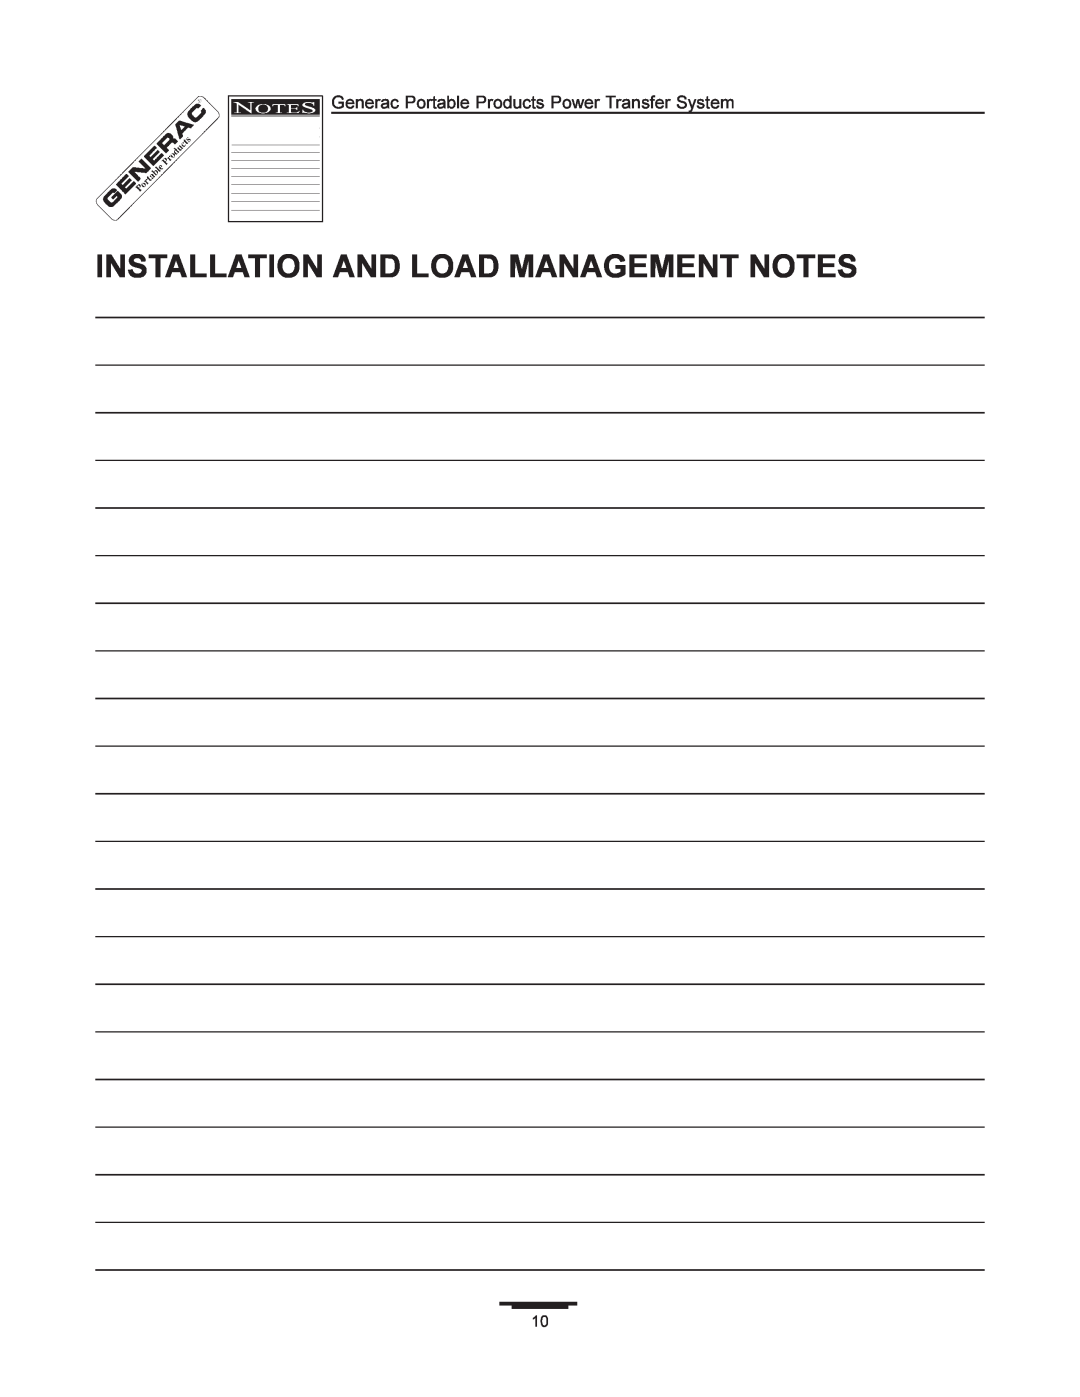 Generac 1403-0 manual Installation And Load Management Notes, Generac Portable Products Power Transfer System 